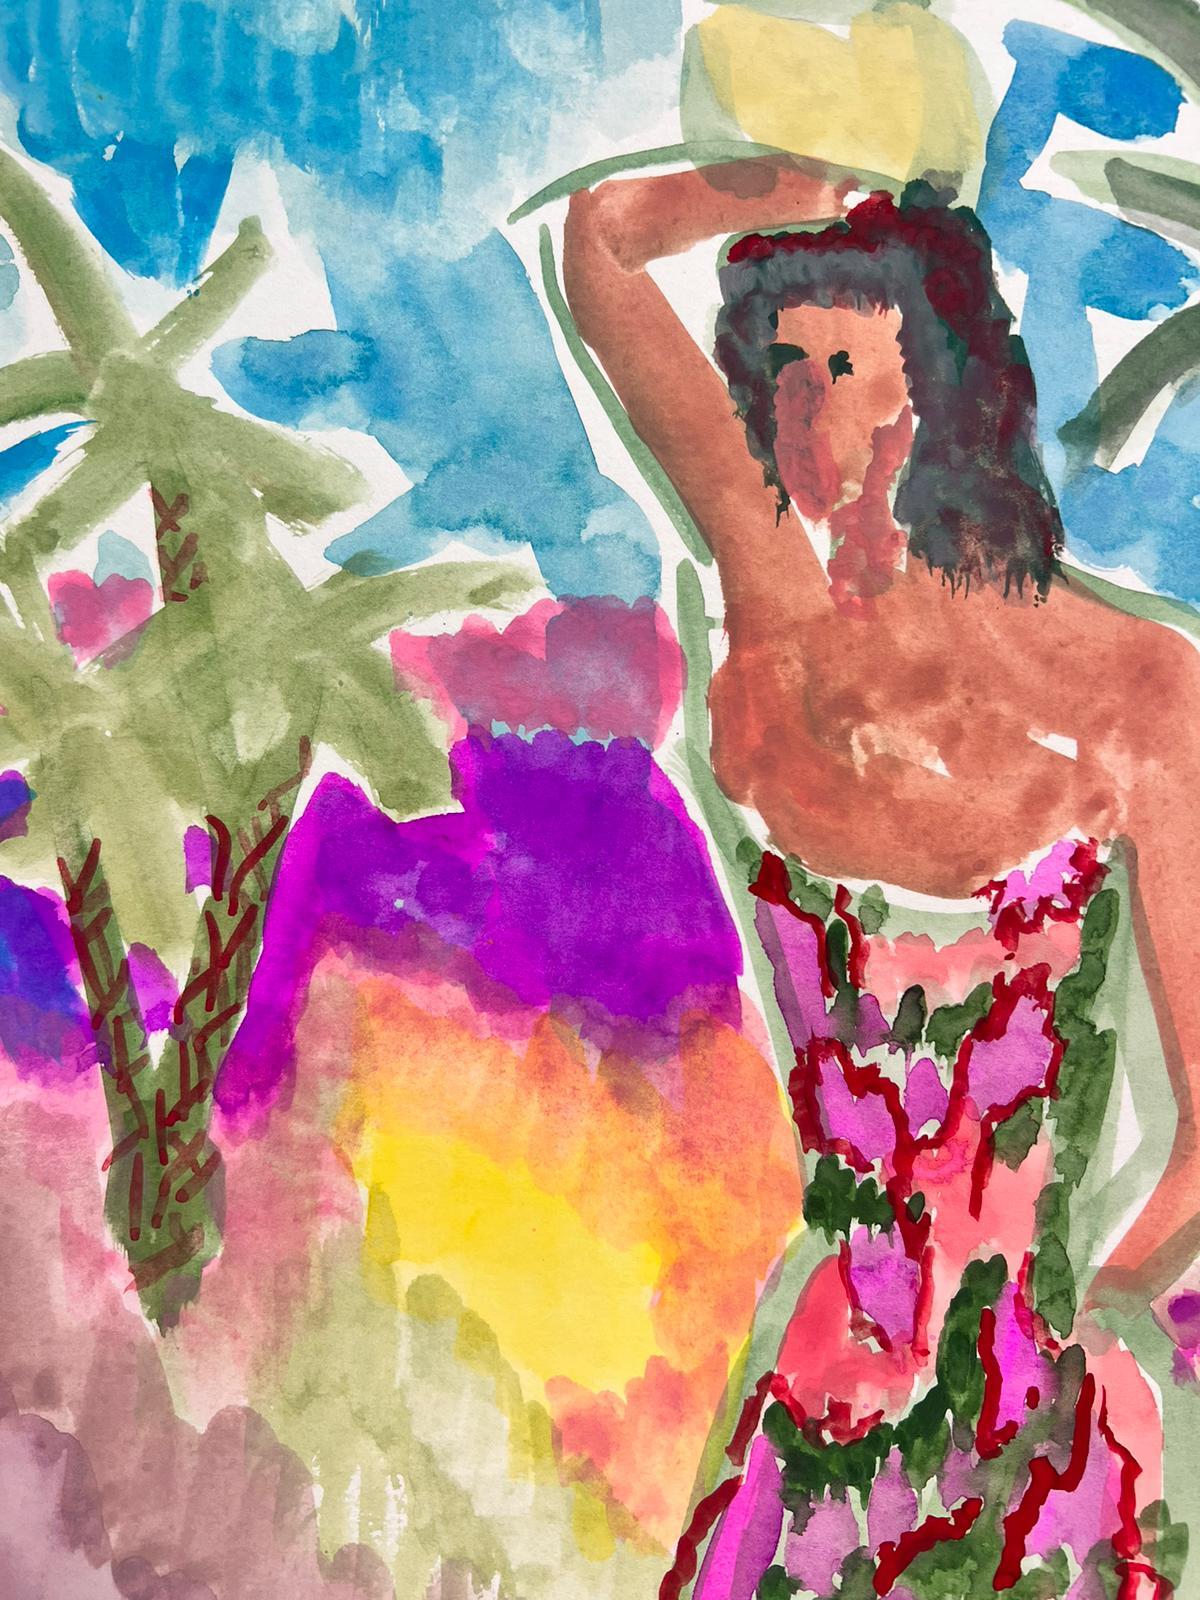 Girl in Tropical Landscape
 by Jean Marc (French 1949-2019)
watercolour on artist paper

painting: 15.75 x 11.75 inches
condition: sound condition

provenance: private collection, South of France

Superb original painting by the widely exhibited